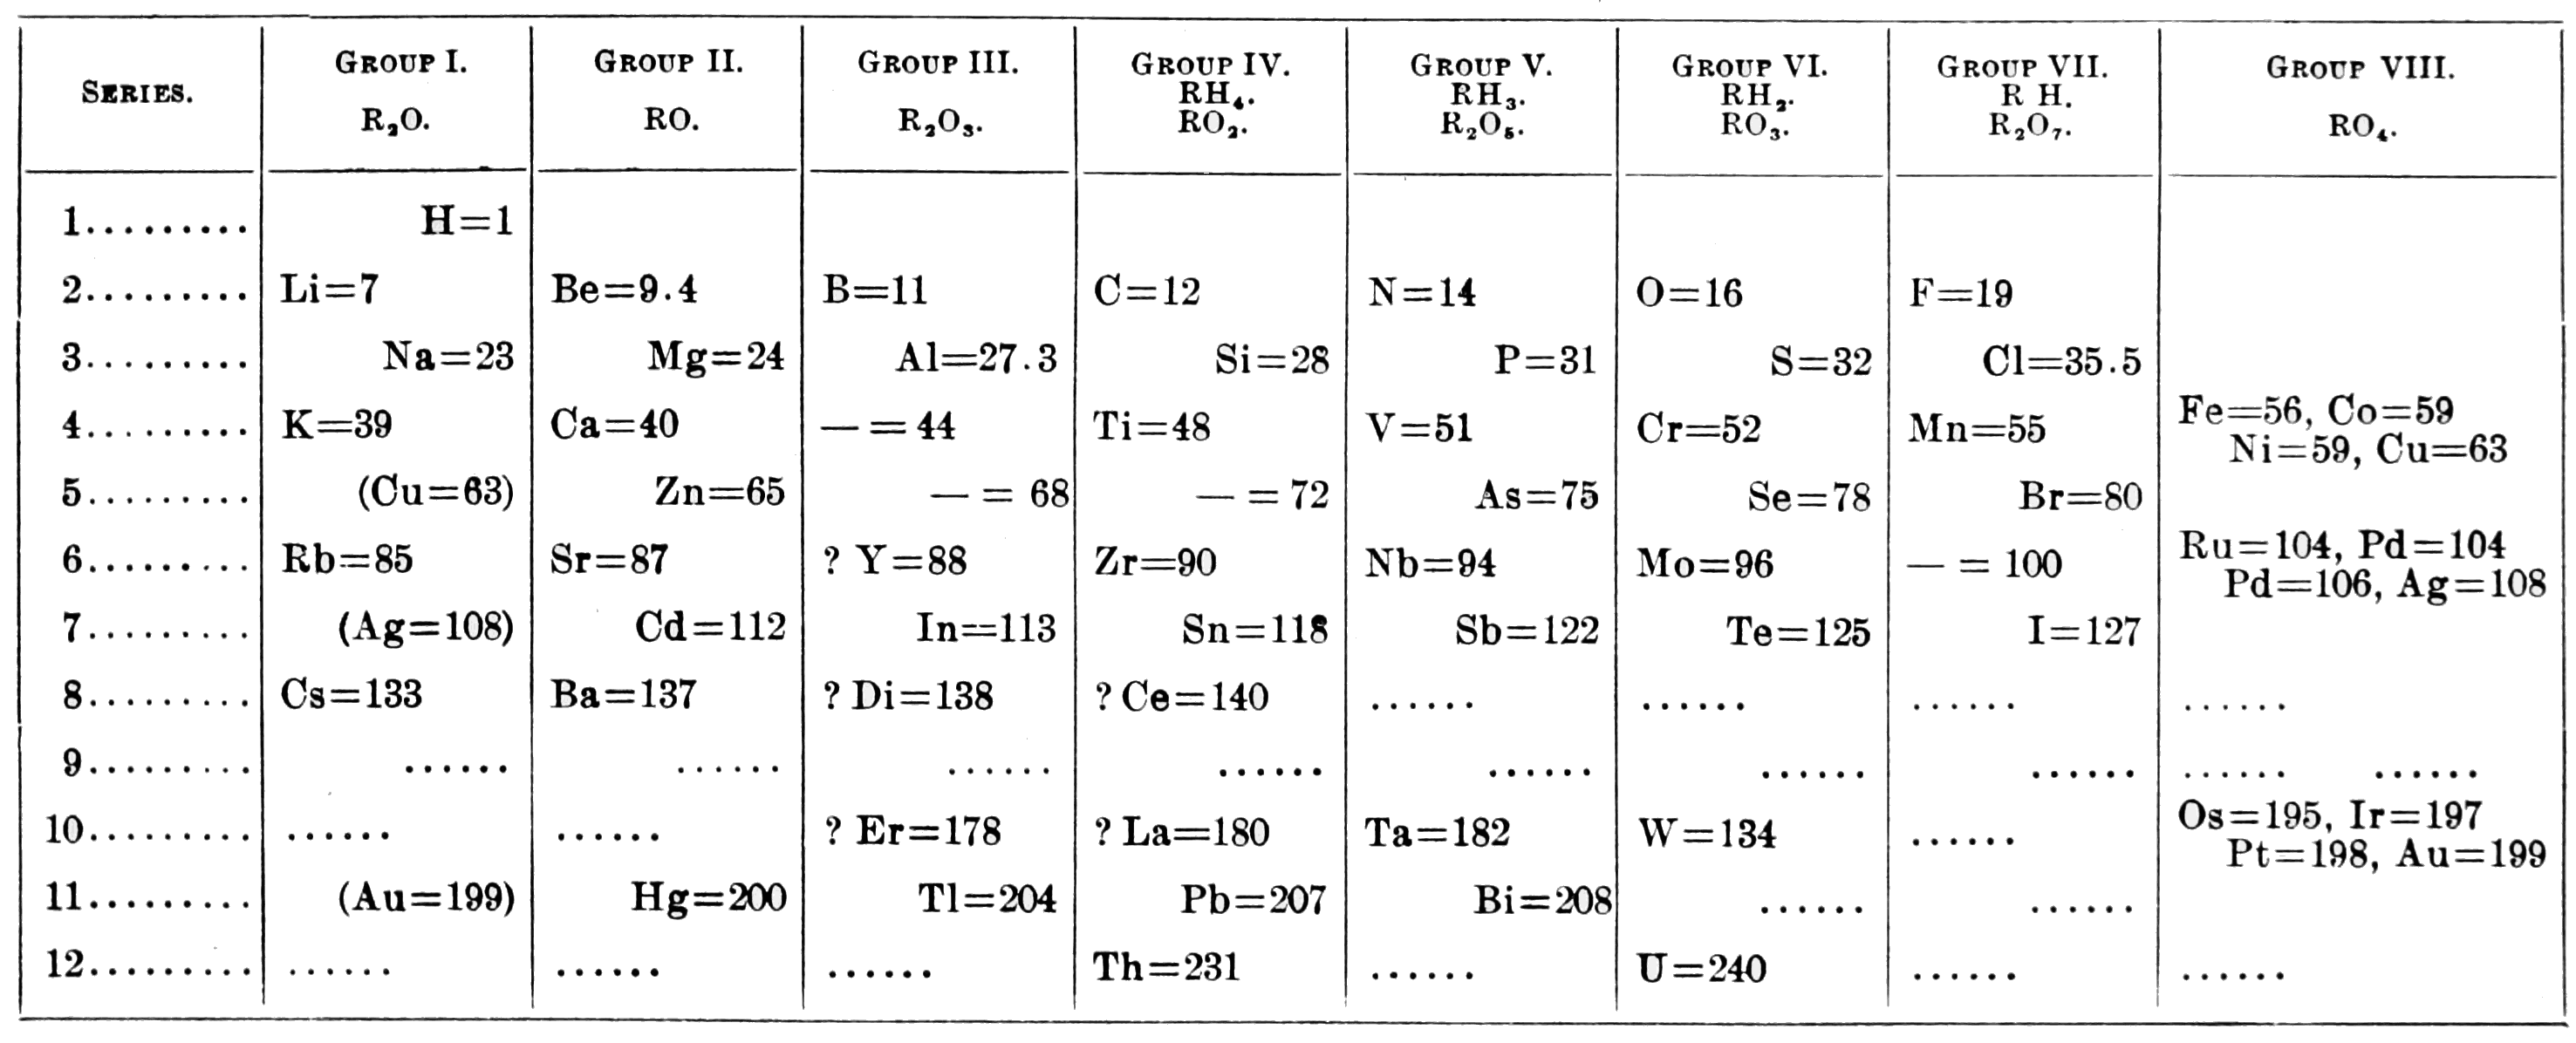 PSM_V59_D171_Mendeleef_periodic_table_of_1871